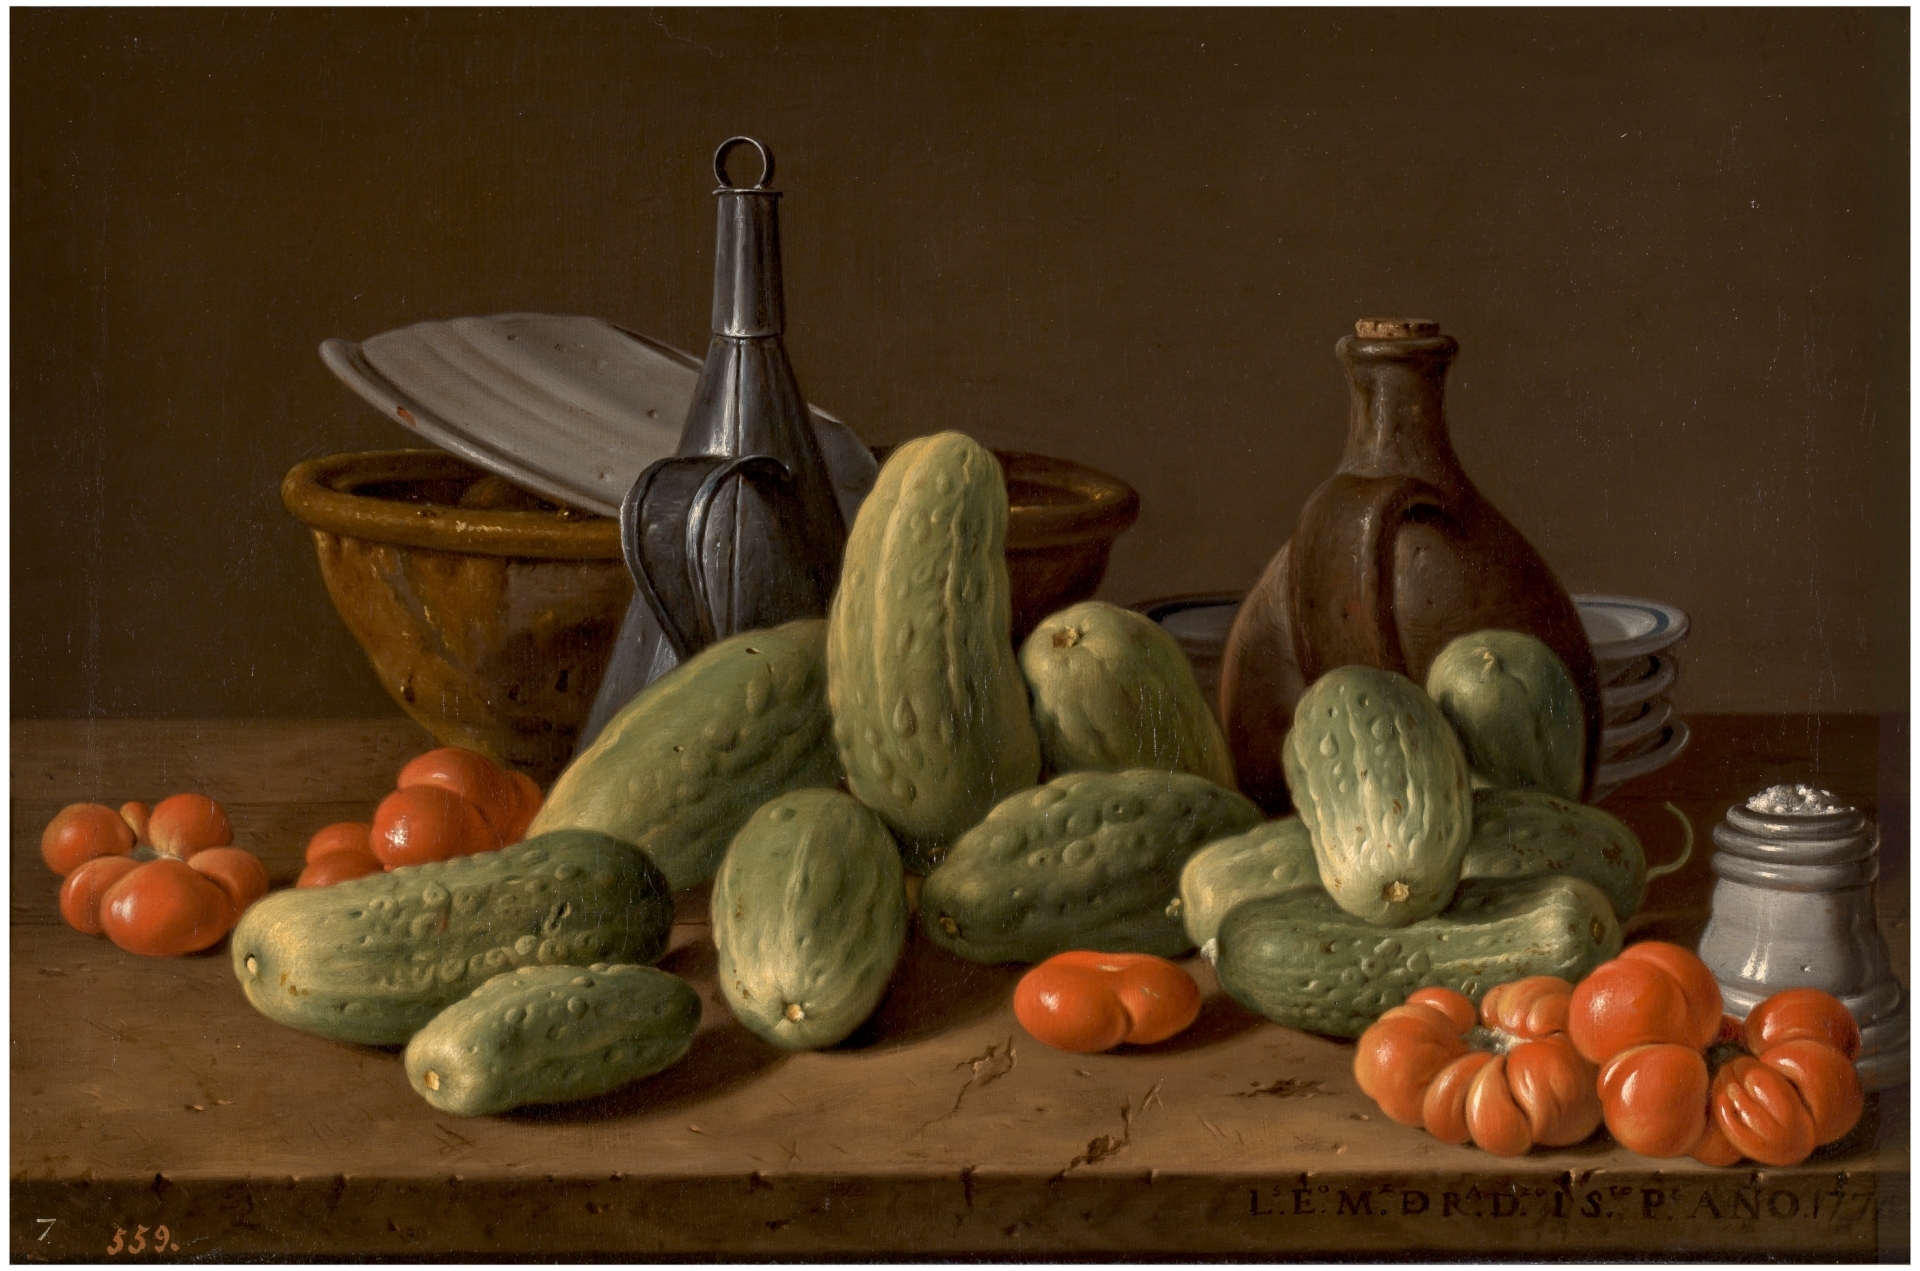 Paiting Still Life with Cucumbers, Tomatoes and Vessels by Luis Meléndez (1774). Museo del Prado